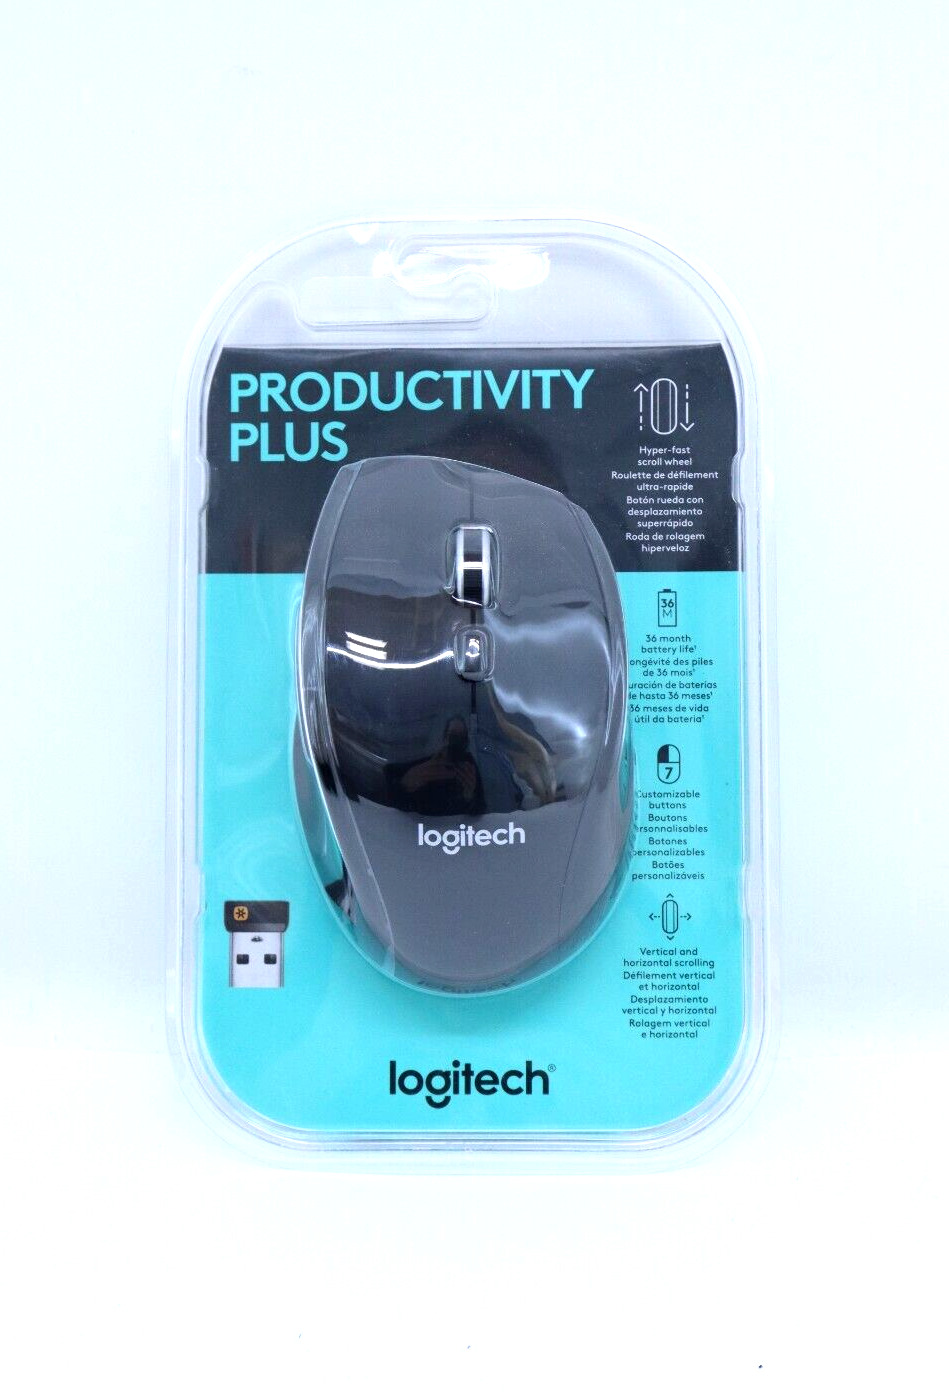 Logitech Productivity Plus Wireless Mouse with 7 Buttons - Black (910-005746)